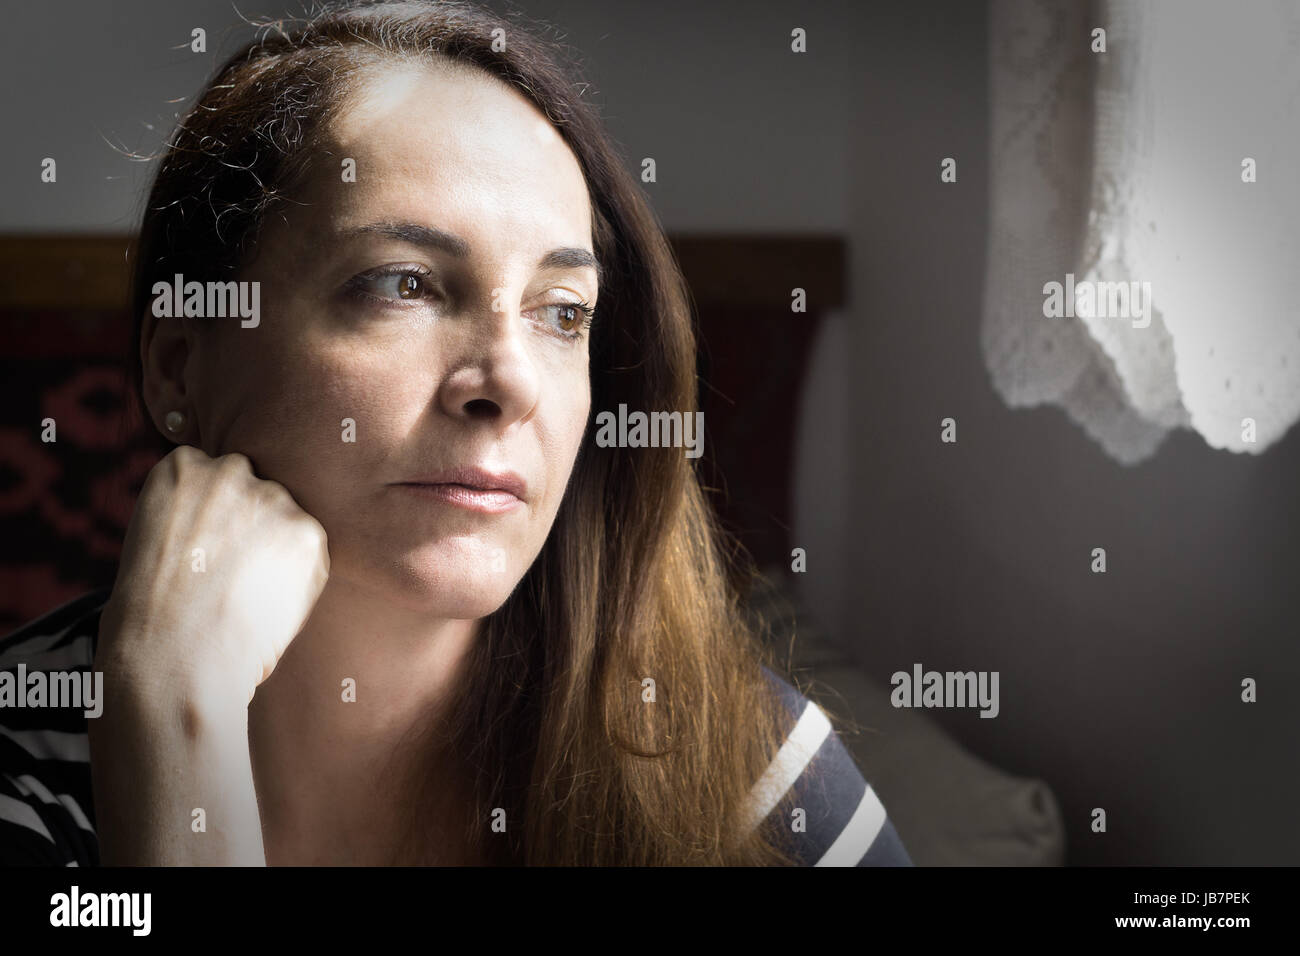 Portrait of a woman looking to a window and with a hand on her neck thinking with doubts, uncertain future Stock Photo